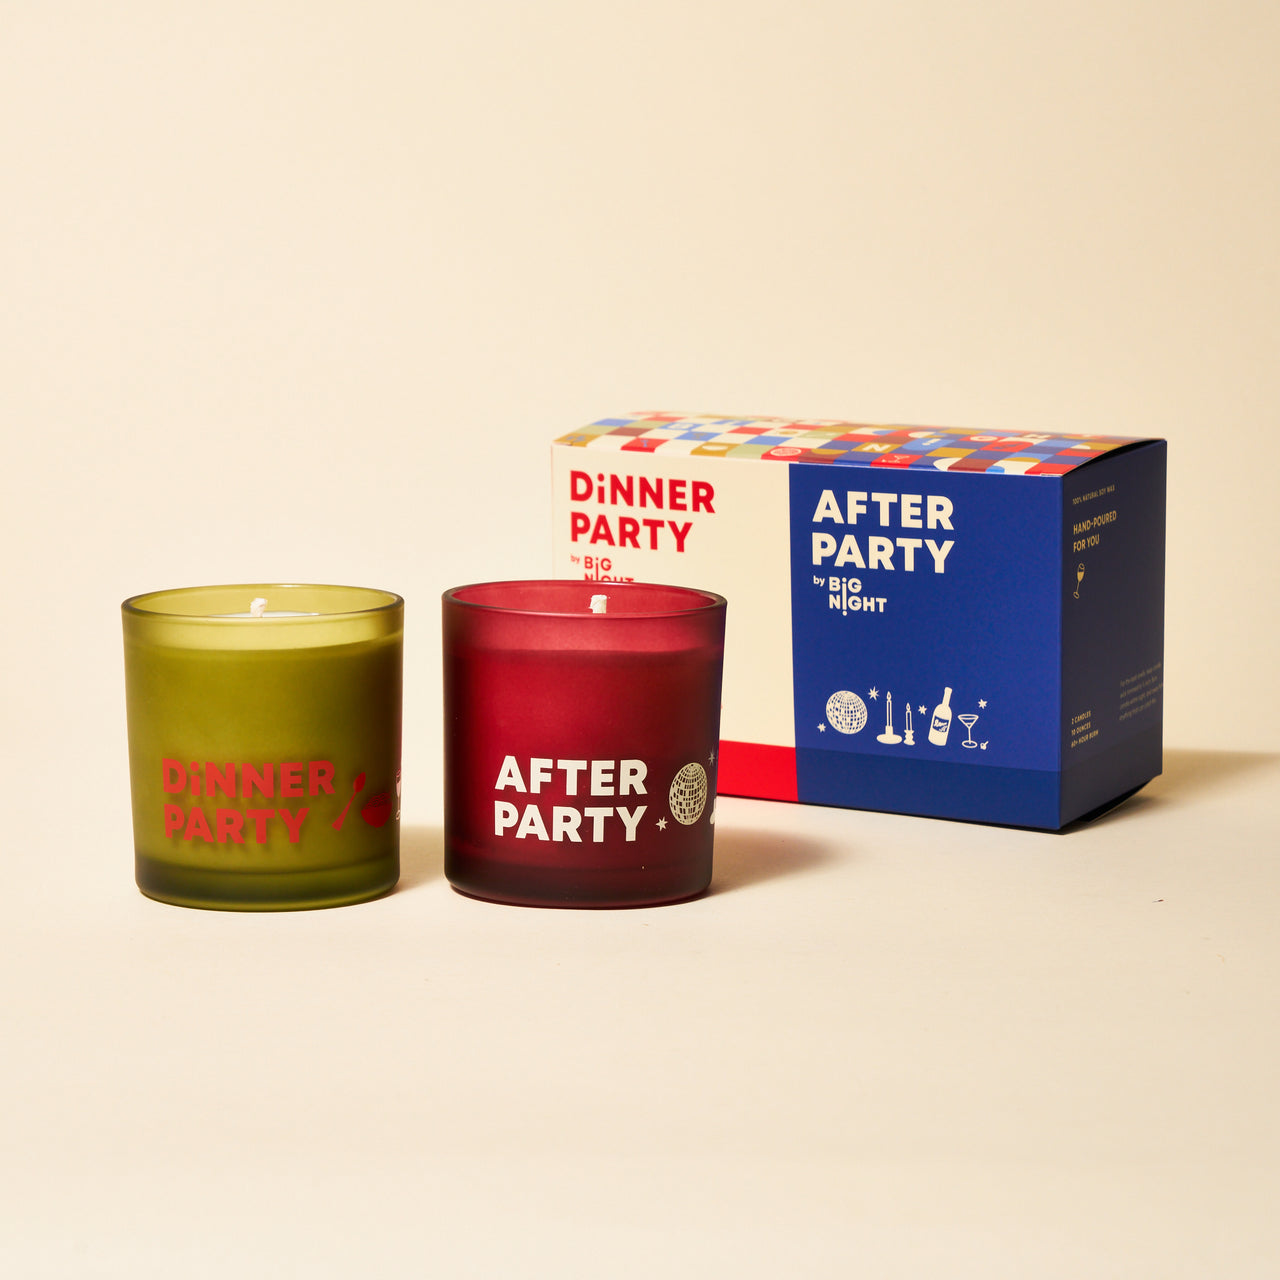 The All Night Candle Set